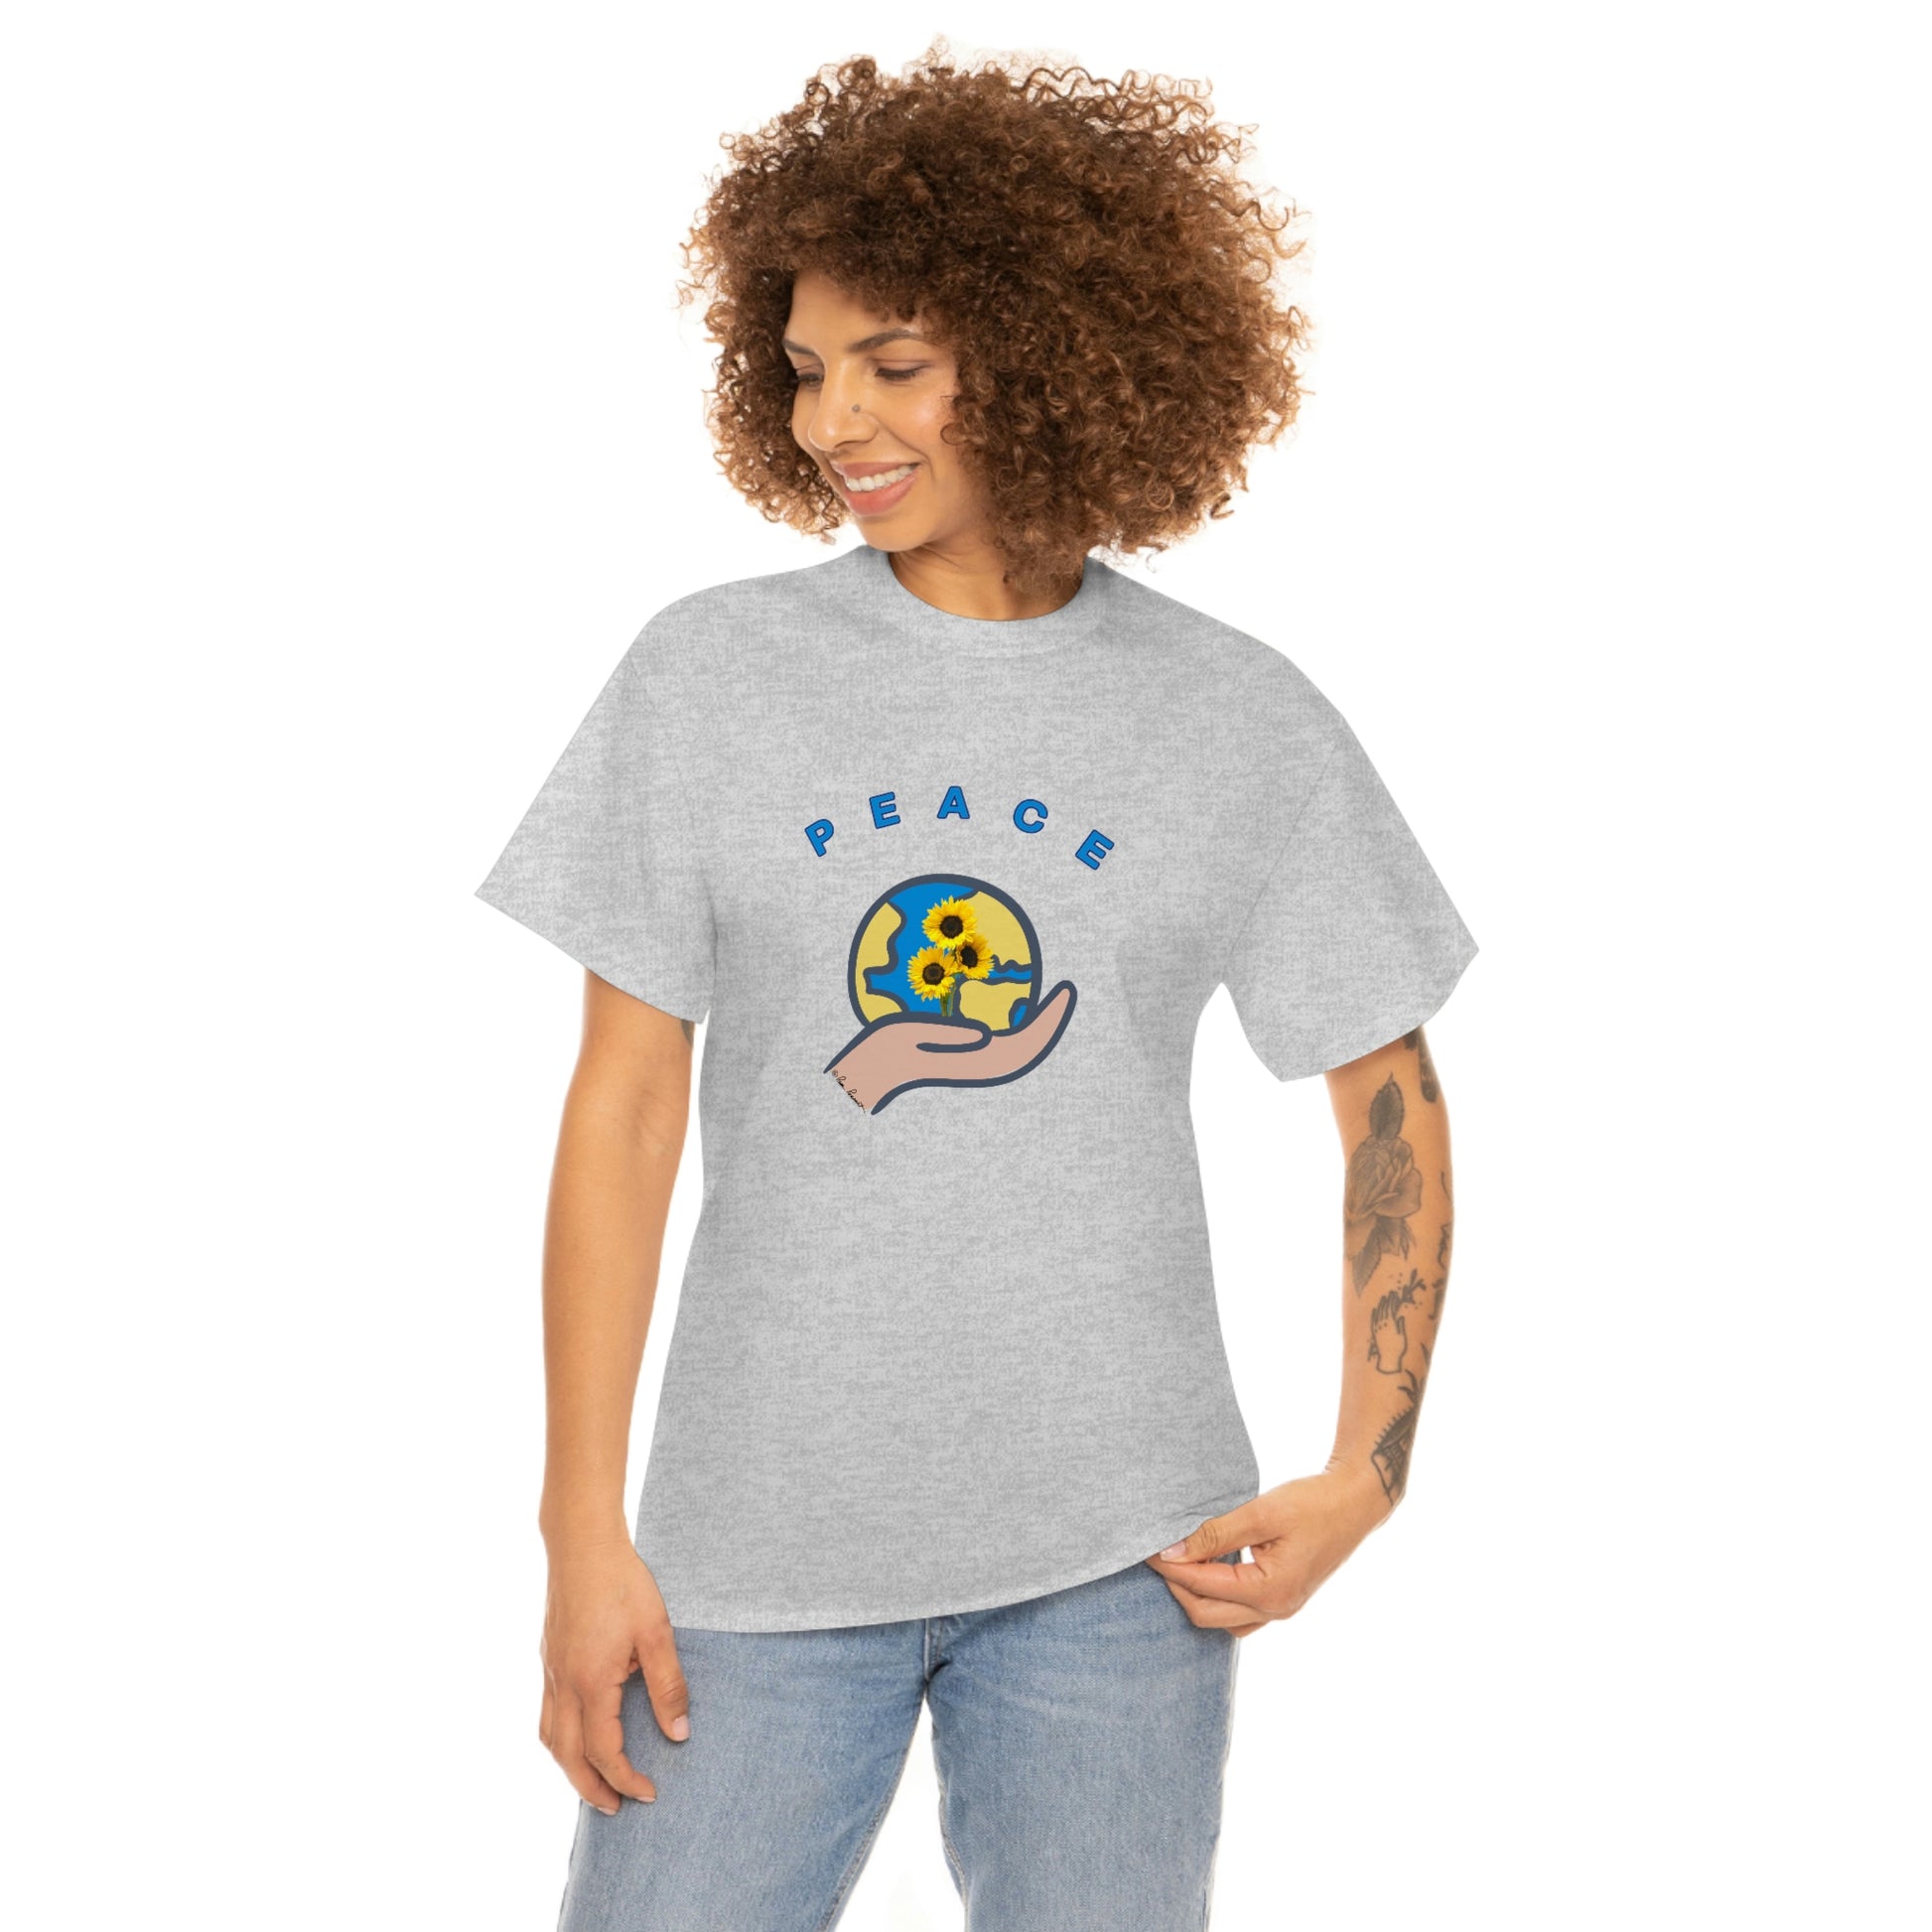 Mock up of the gray t-shirt as worn by a slim woman